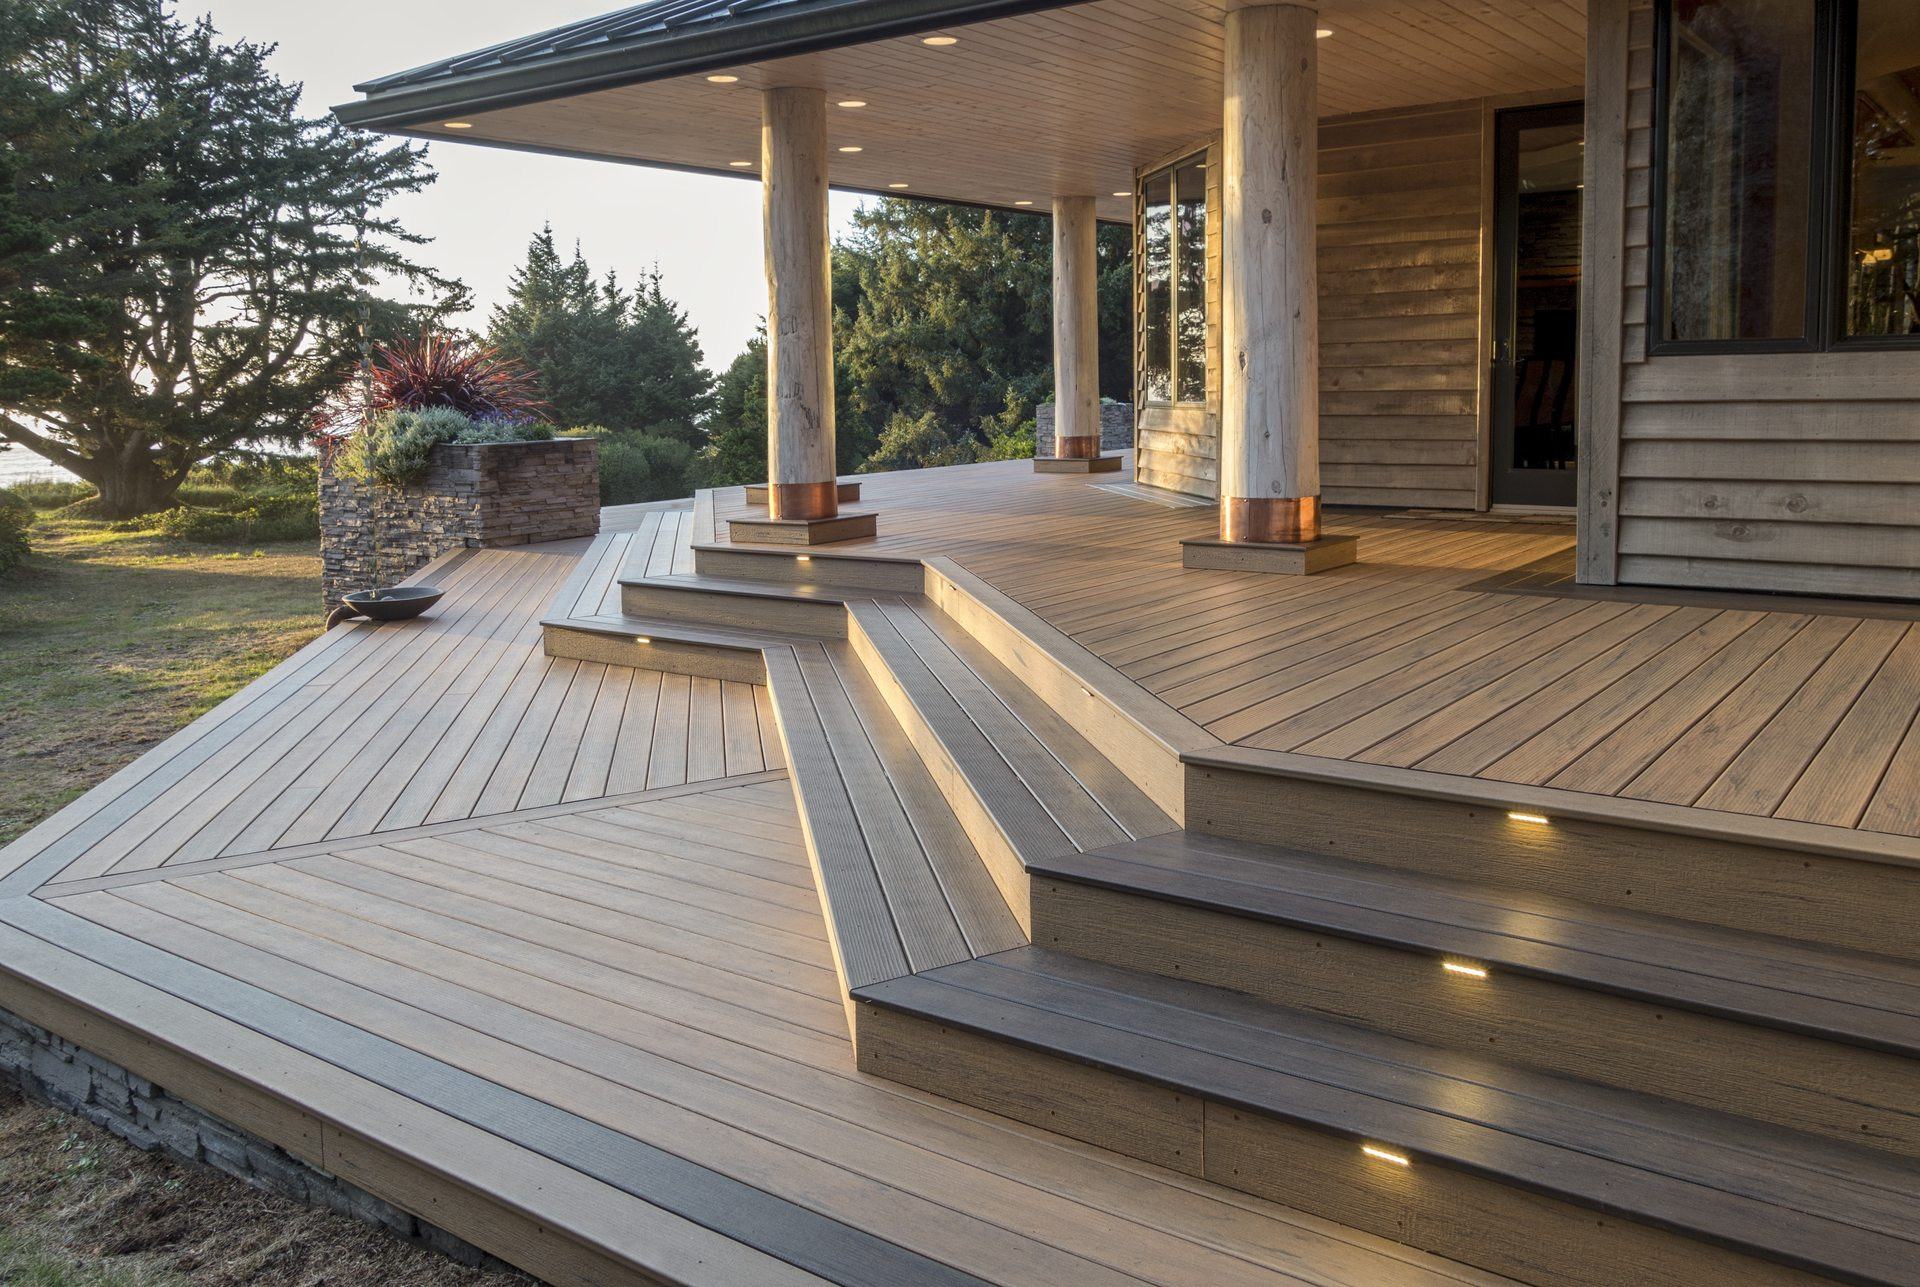 Timbertech Terrain Composite Decking Colorado Rmfp pertaining to dimensions 1920 X 1287